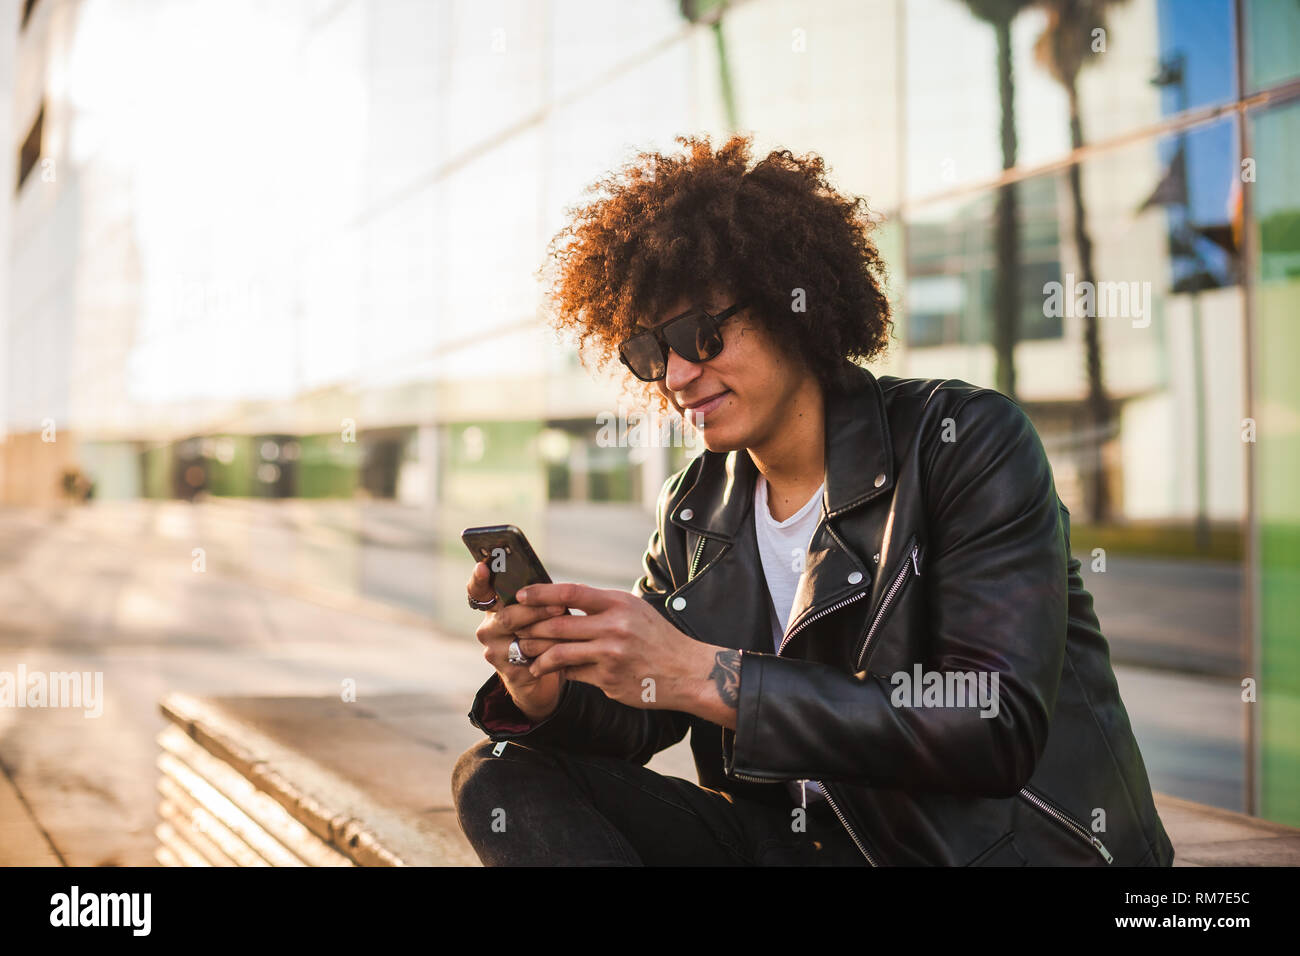 A handsome black man with modern afro hairstyle sitting relaxed in the street using a smart phone Stock Photo